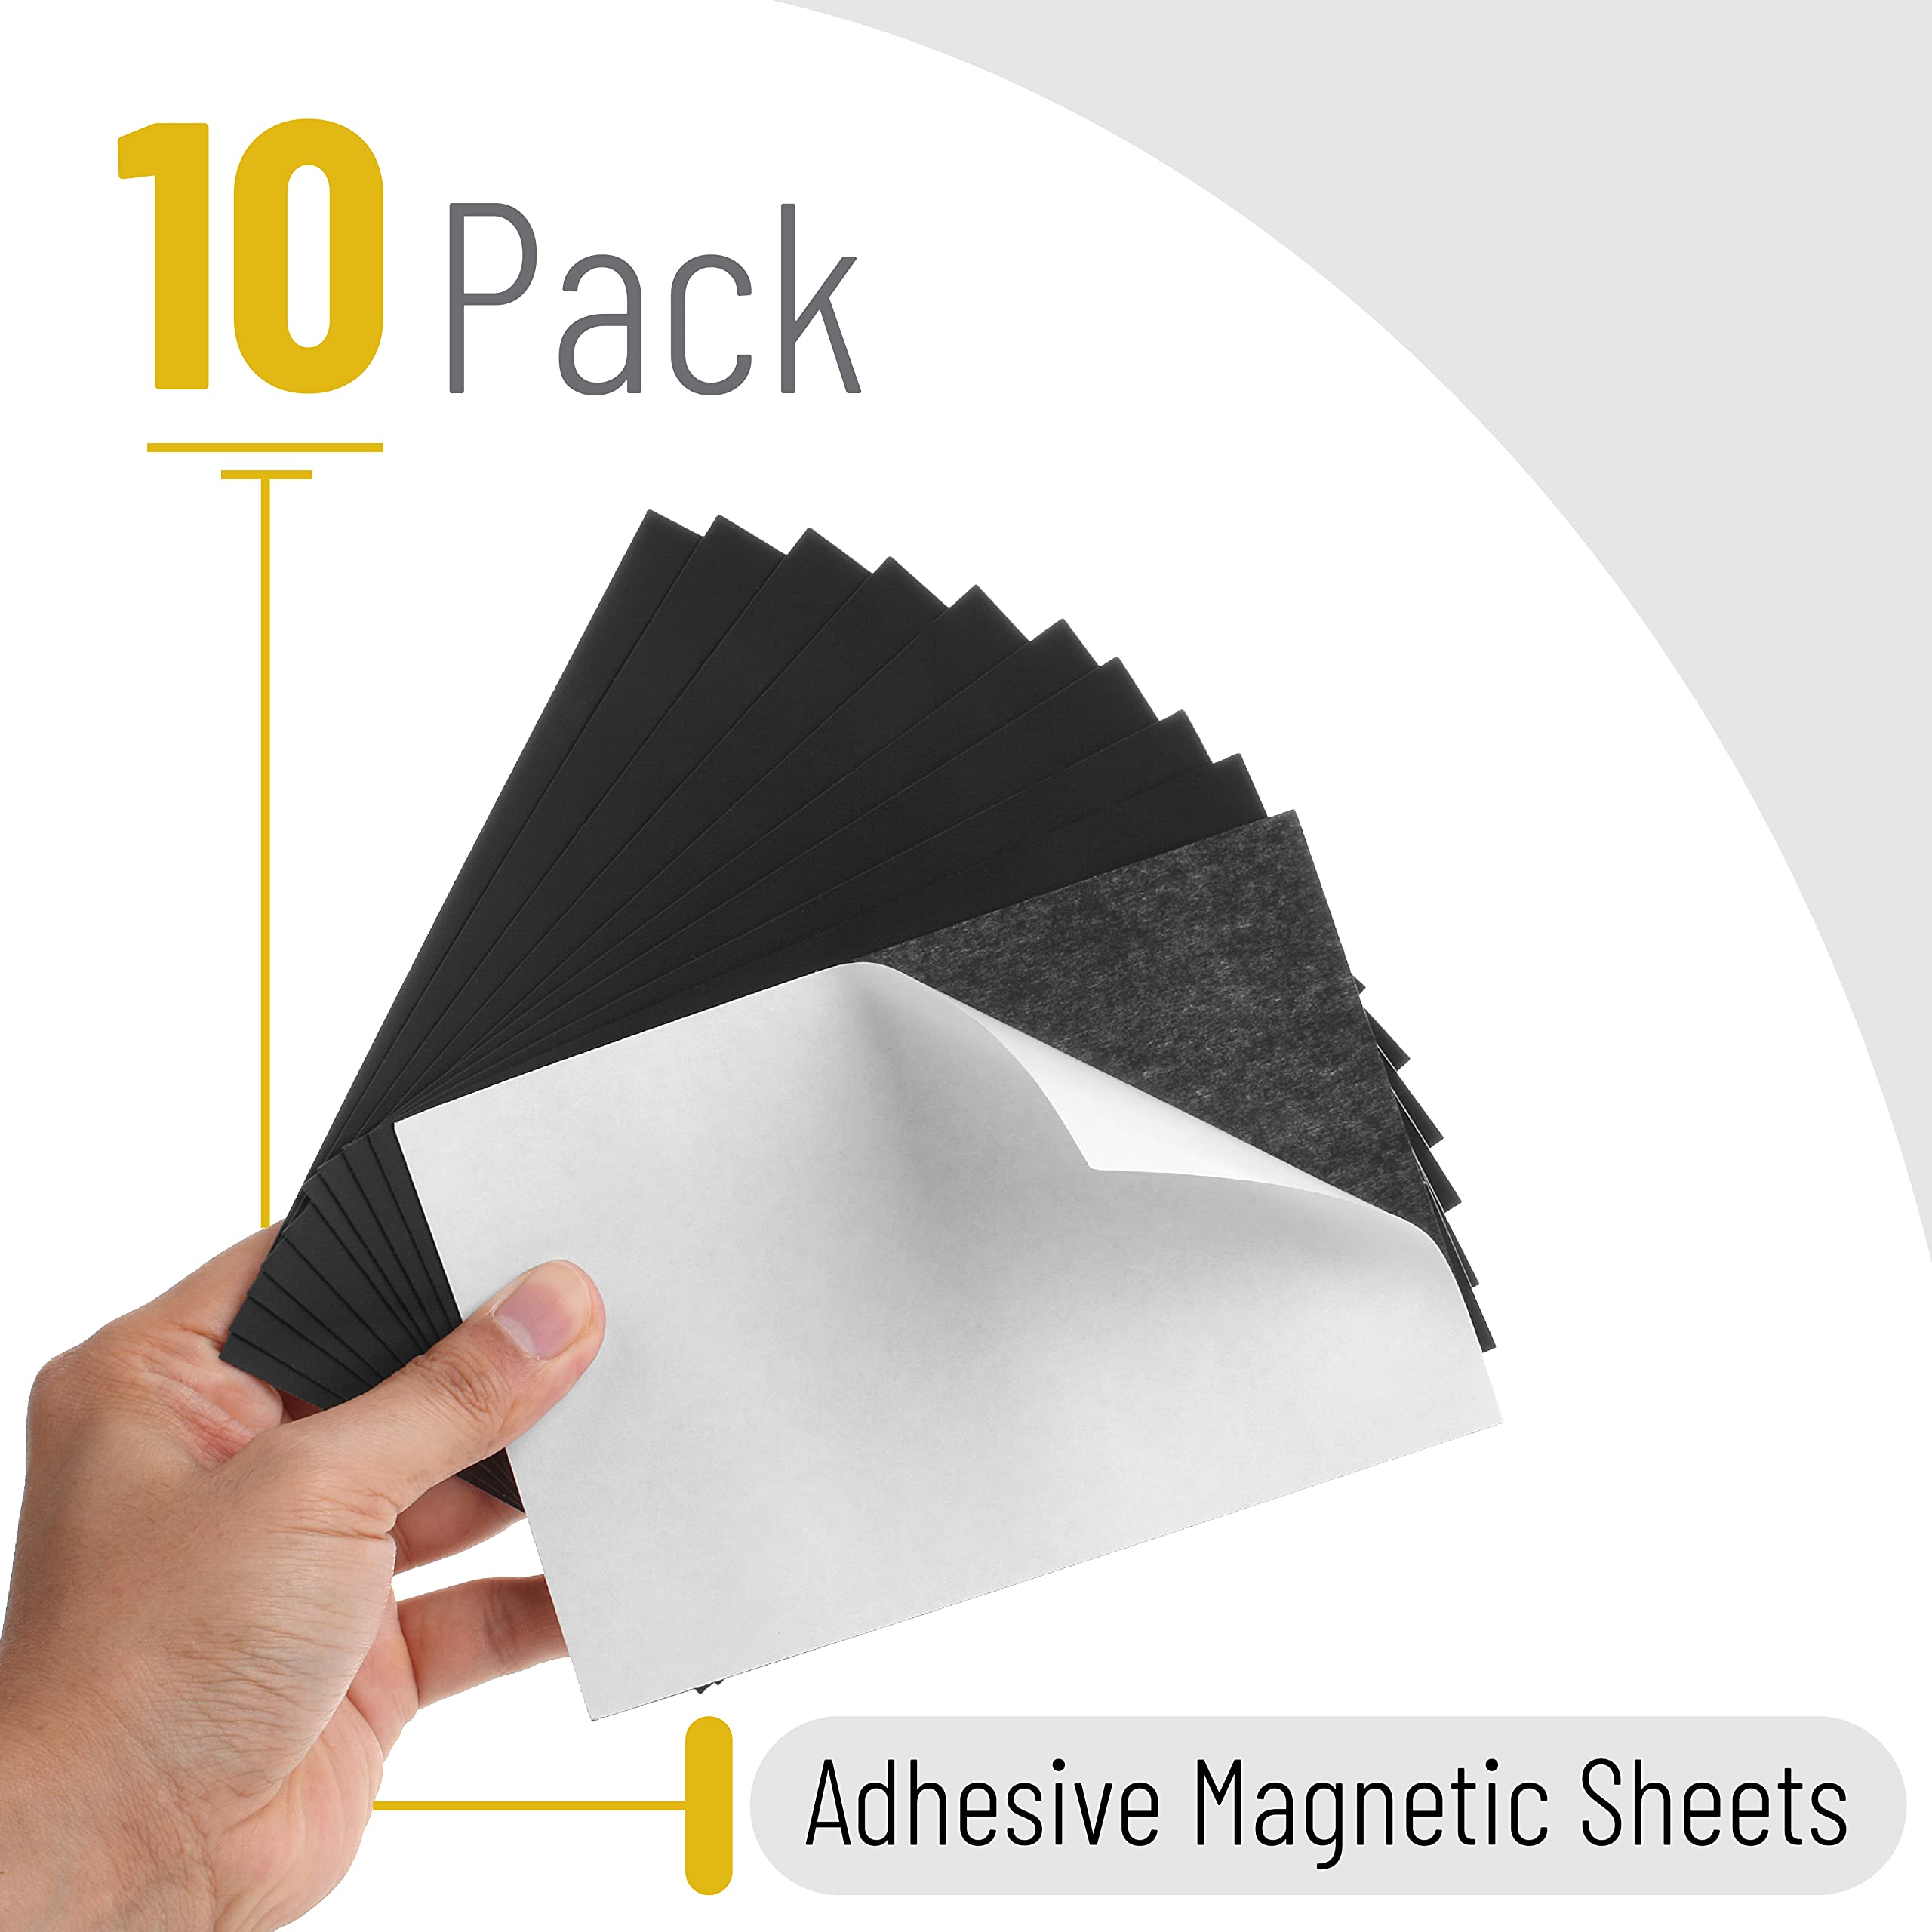 FEUILLE MAGNETIQUE ADHESIVE 10,2X15,3